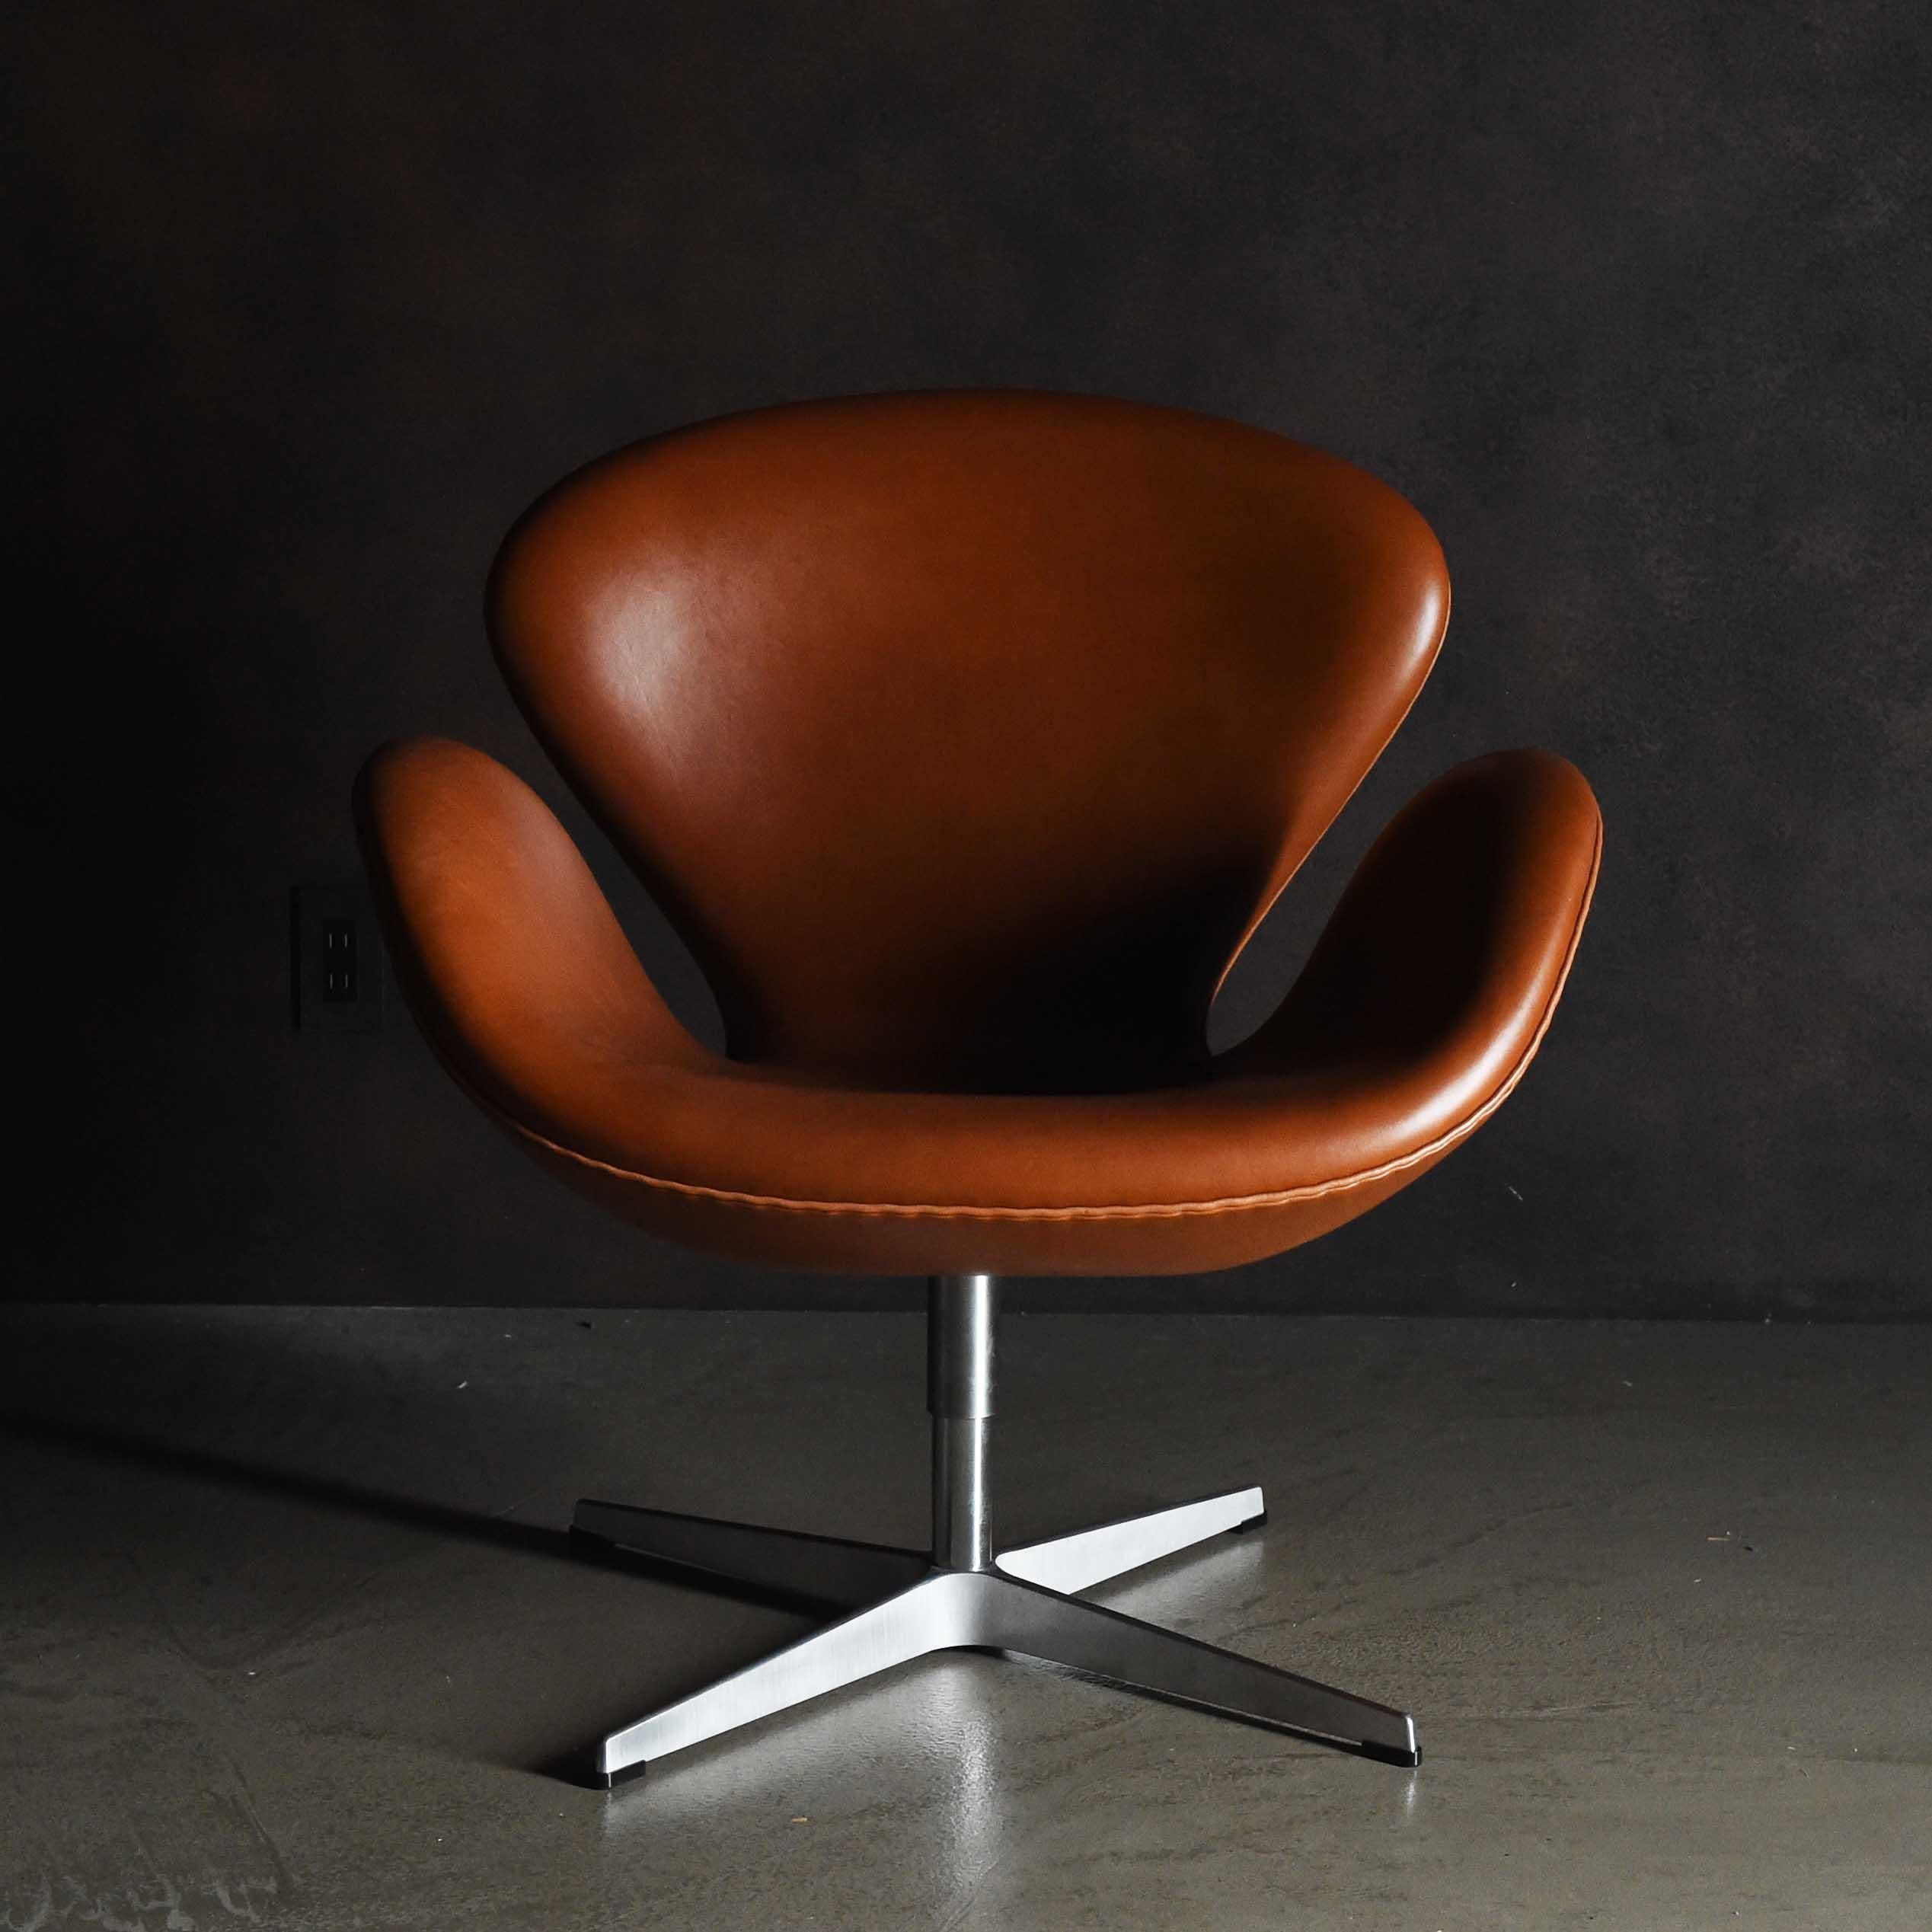 The Swan Chair is a lounge chair designed by Arne Jacobsen in 1958 for the lobby and lounge areas of the SAS Royal Hotel in Copenhagen. The chair's form, which consists only of curves, is simple and distinctive, giving the viewer an organic and soft